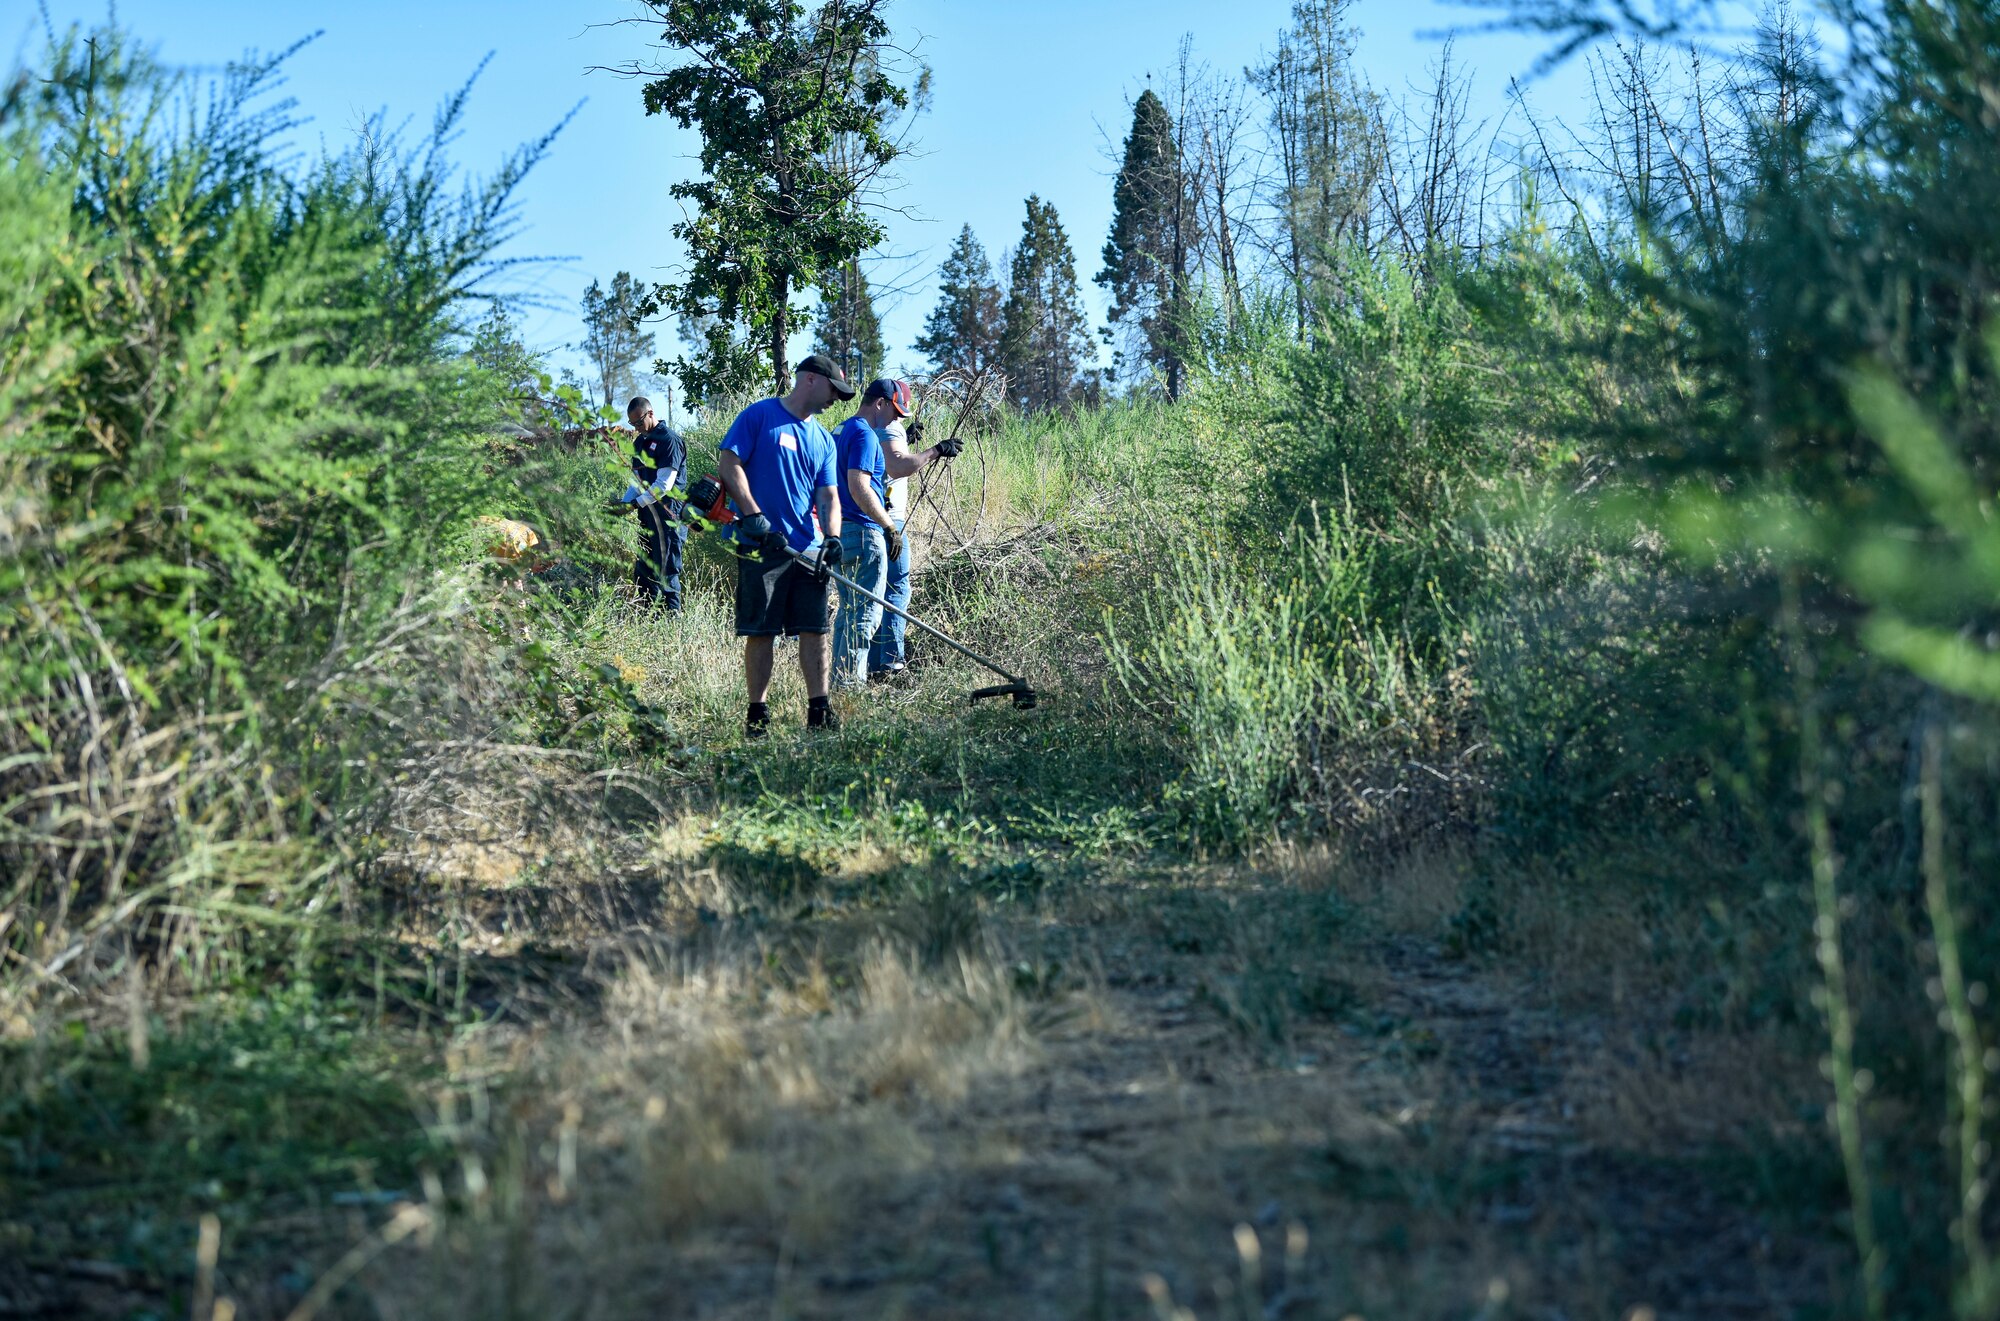 Airmen volunteers from Beale Air Force Base weed whack and clear weeds and brush, June 25, 2021, in Paradise, California.